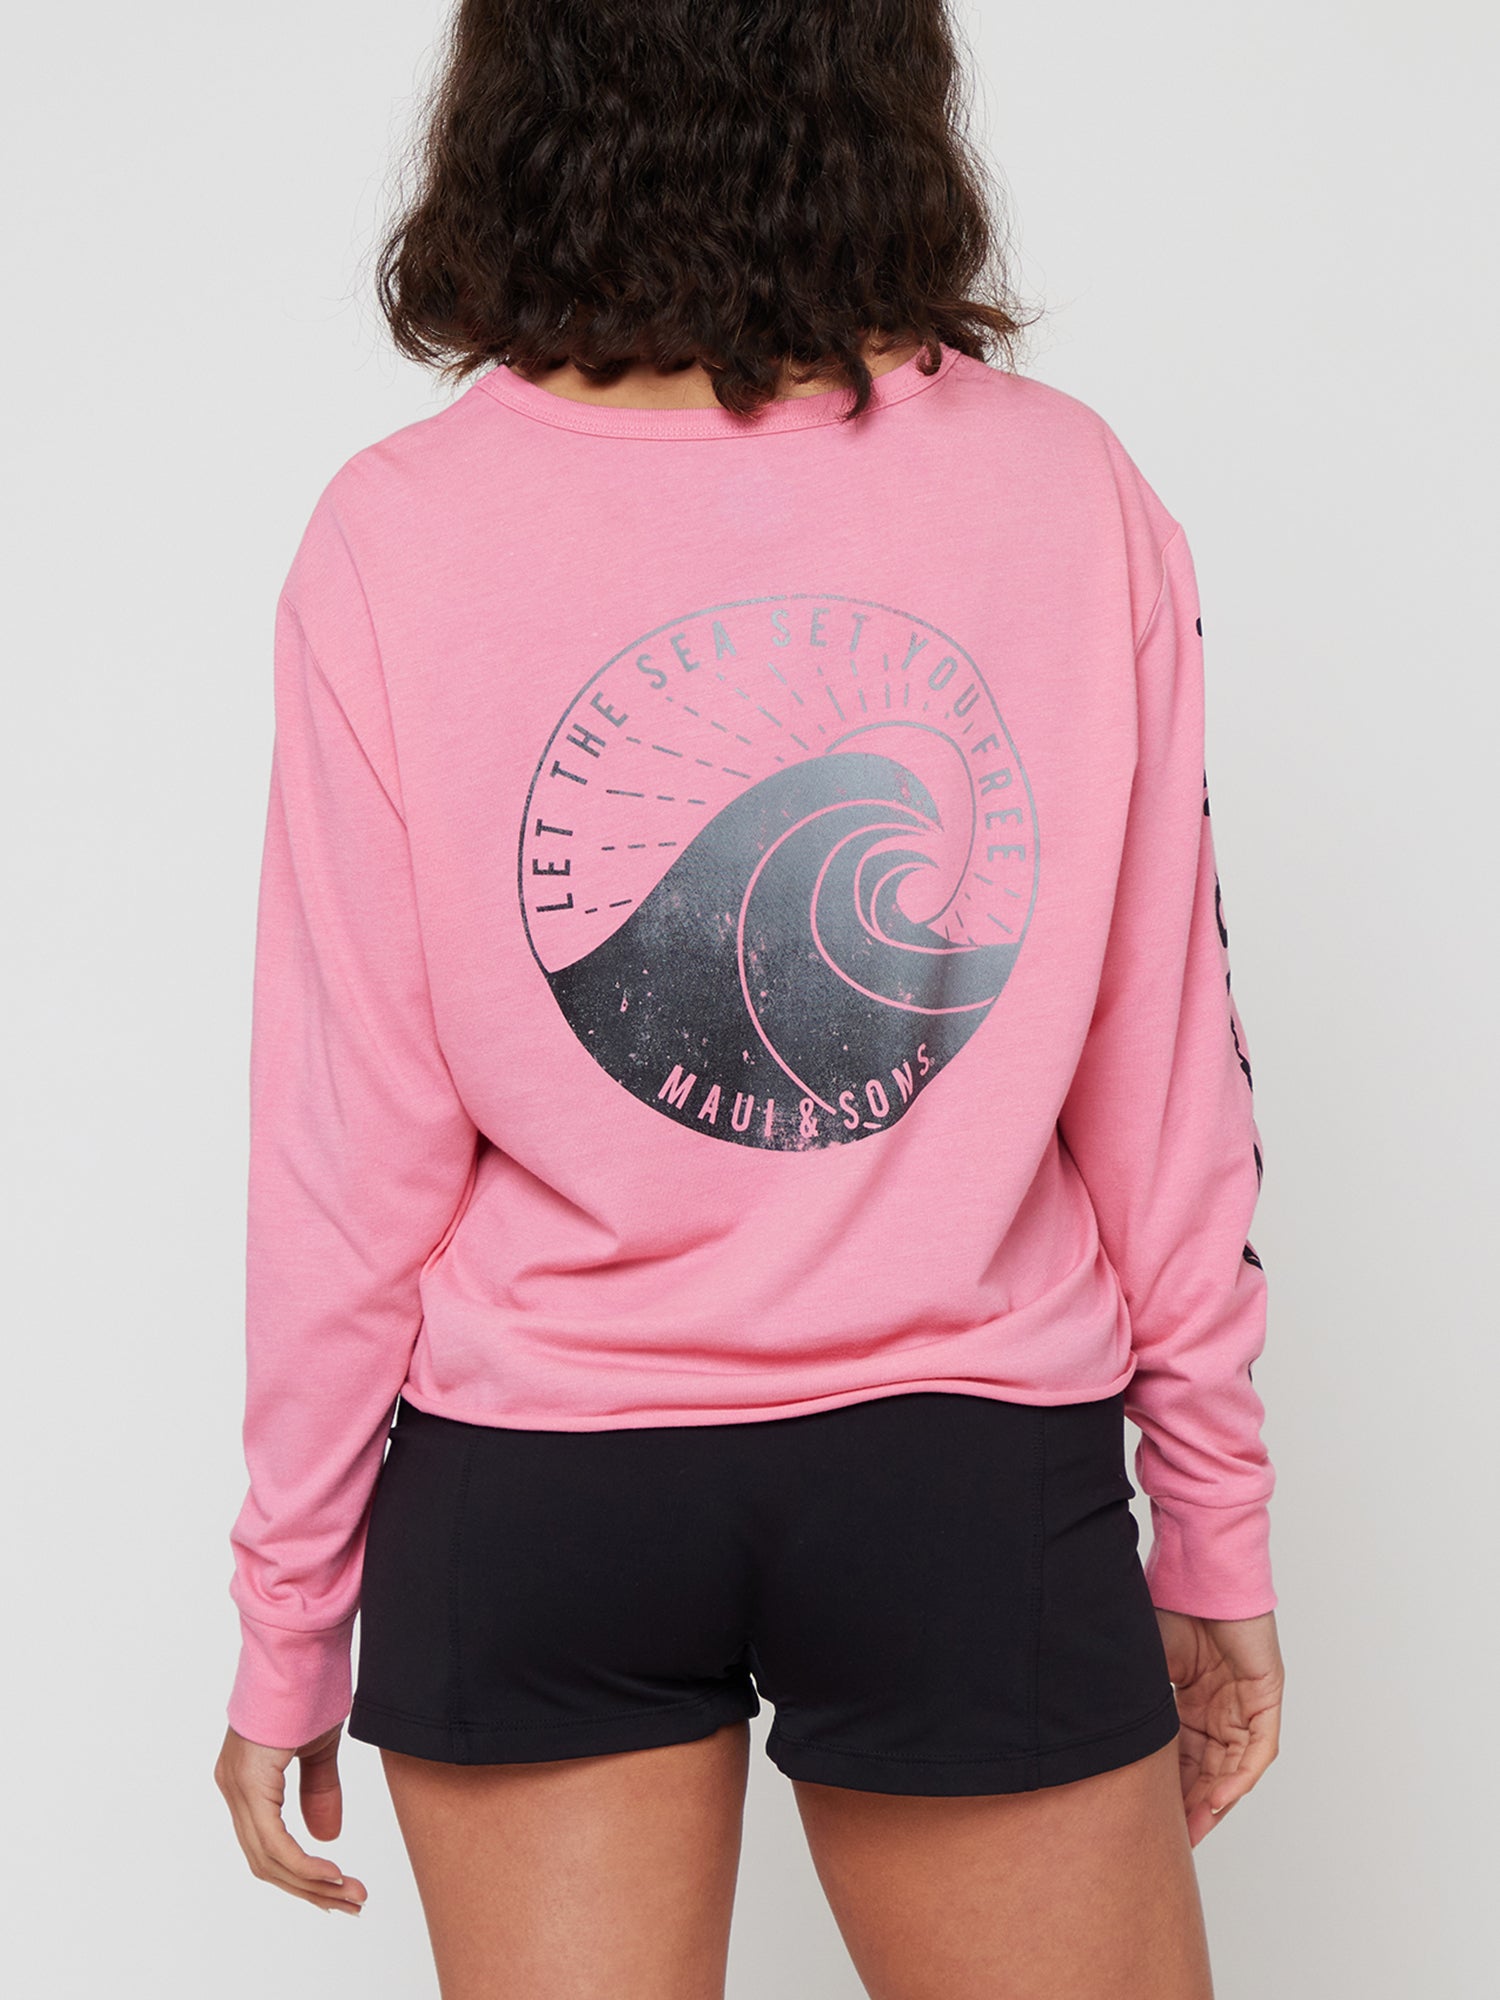 Set You Free Womens Long Sleeve in Coral